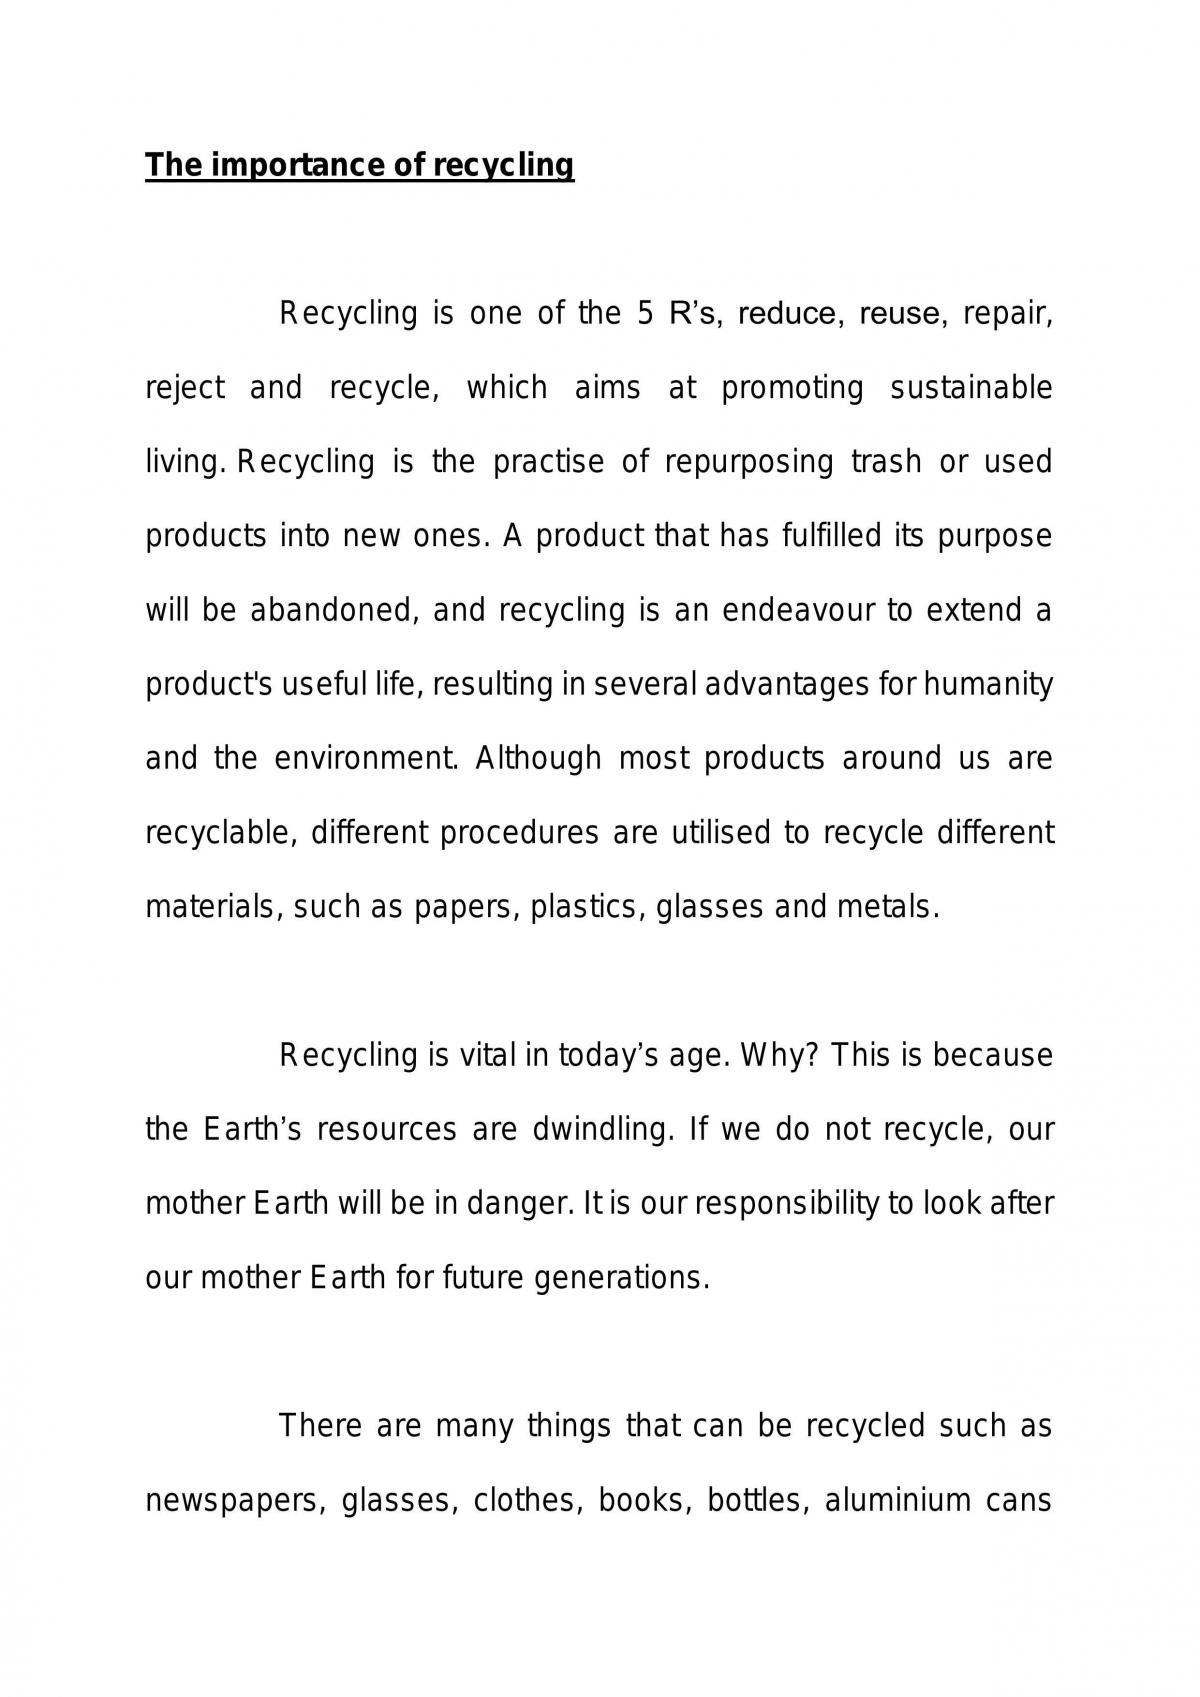 recycling for environment essay